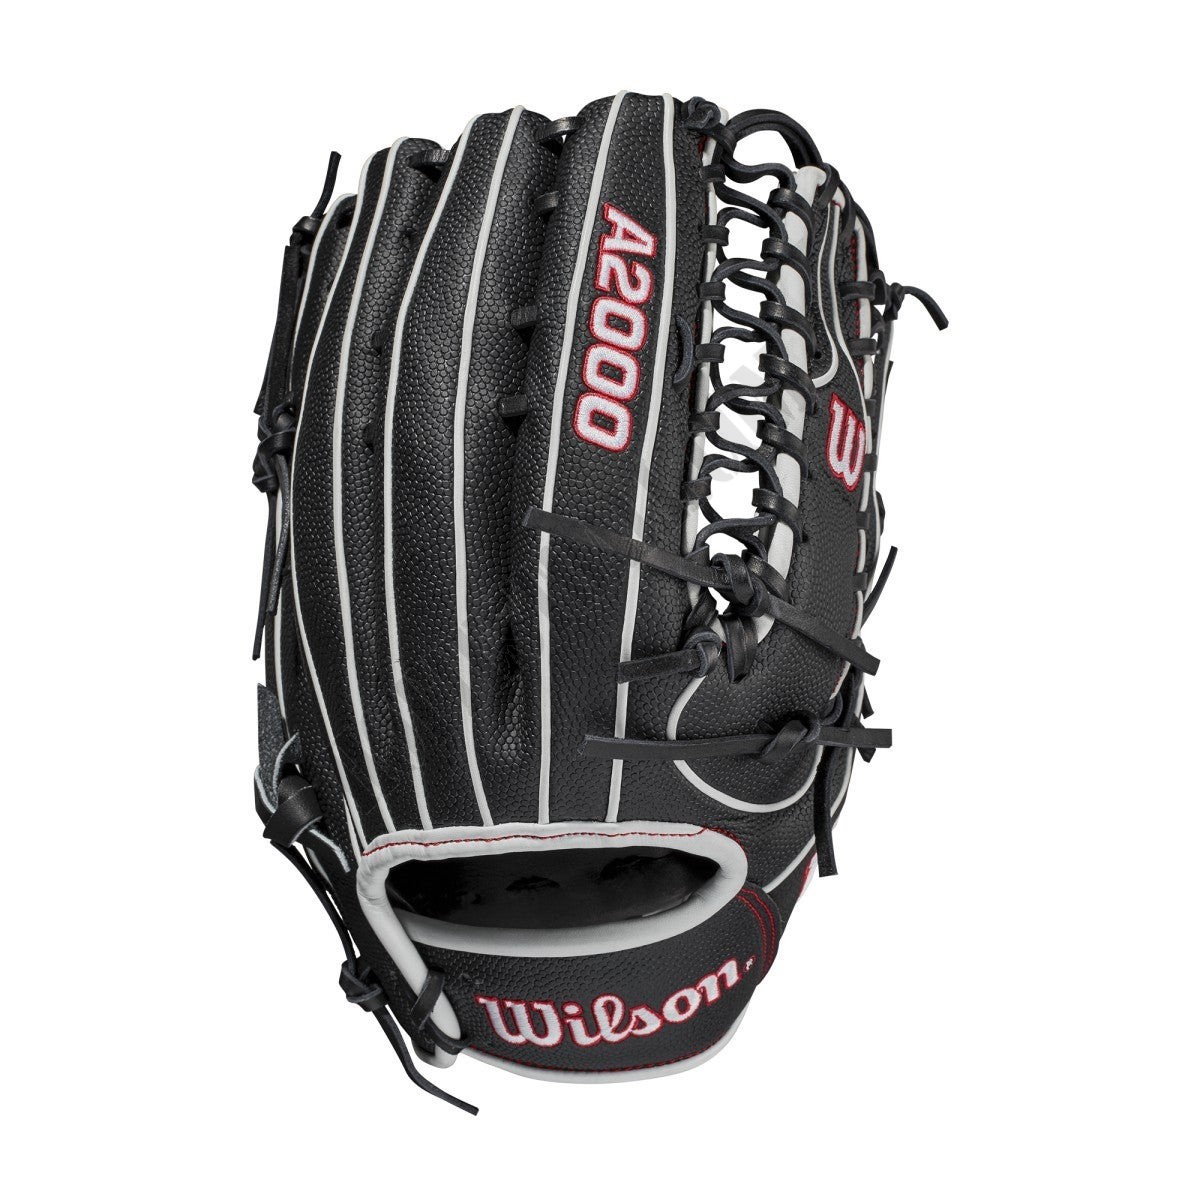 2021 A2000 SCOT7SS 12.75" Outfield Baseball Glove ● Wilson Promotions - -1